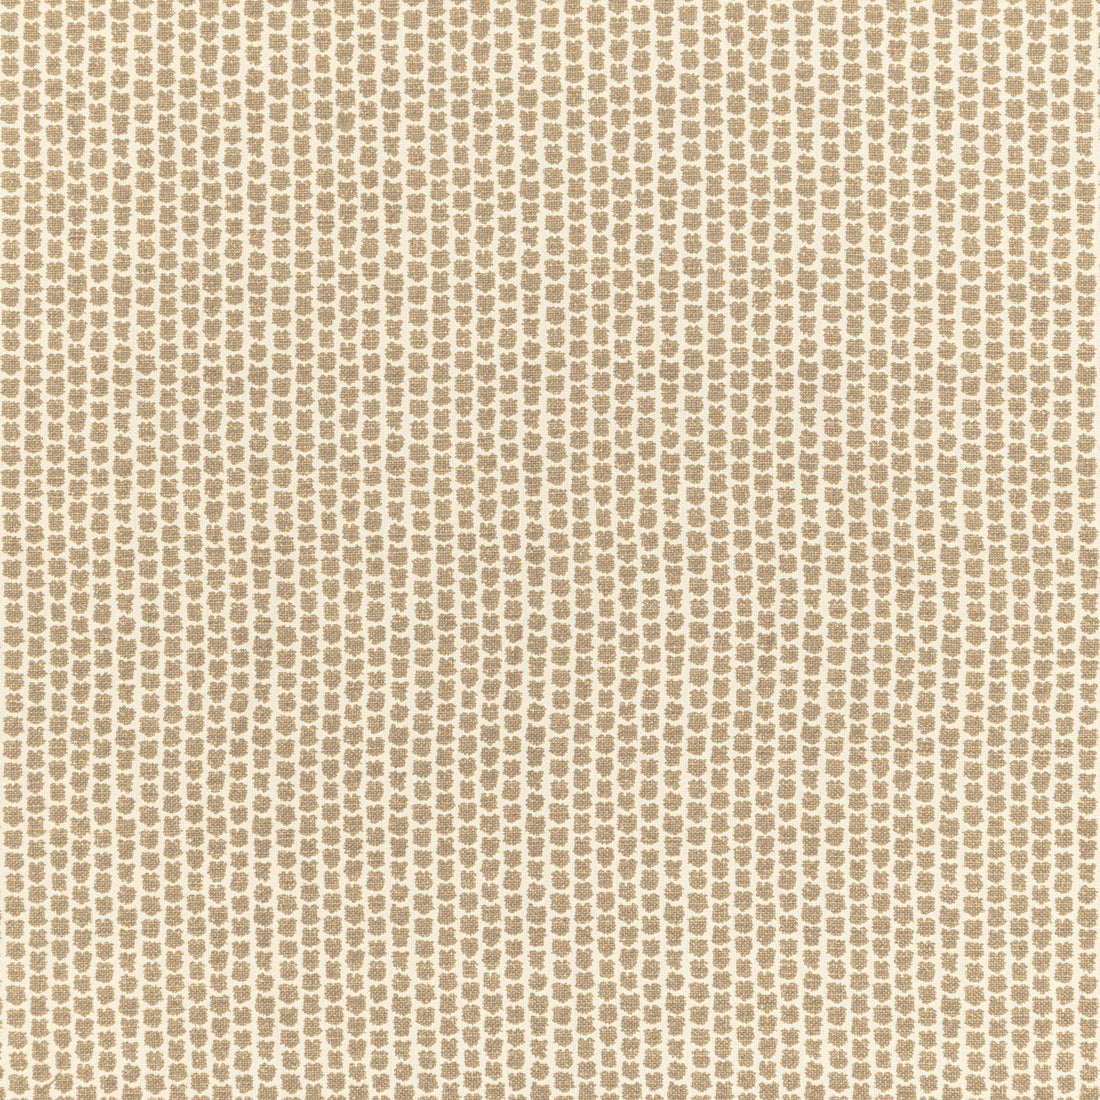 Kaya fabric in flax color - pattern 2012101.16.0 - by Lee Jofa in the Breckenridge collection